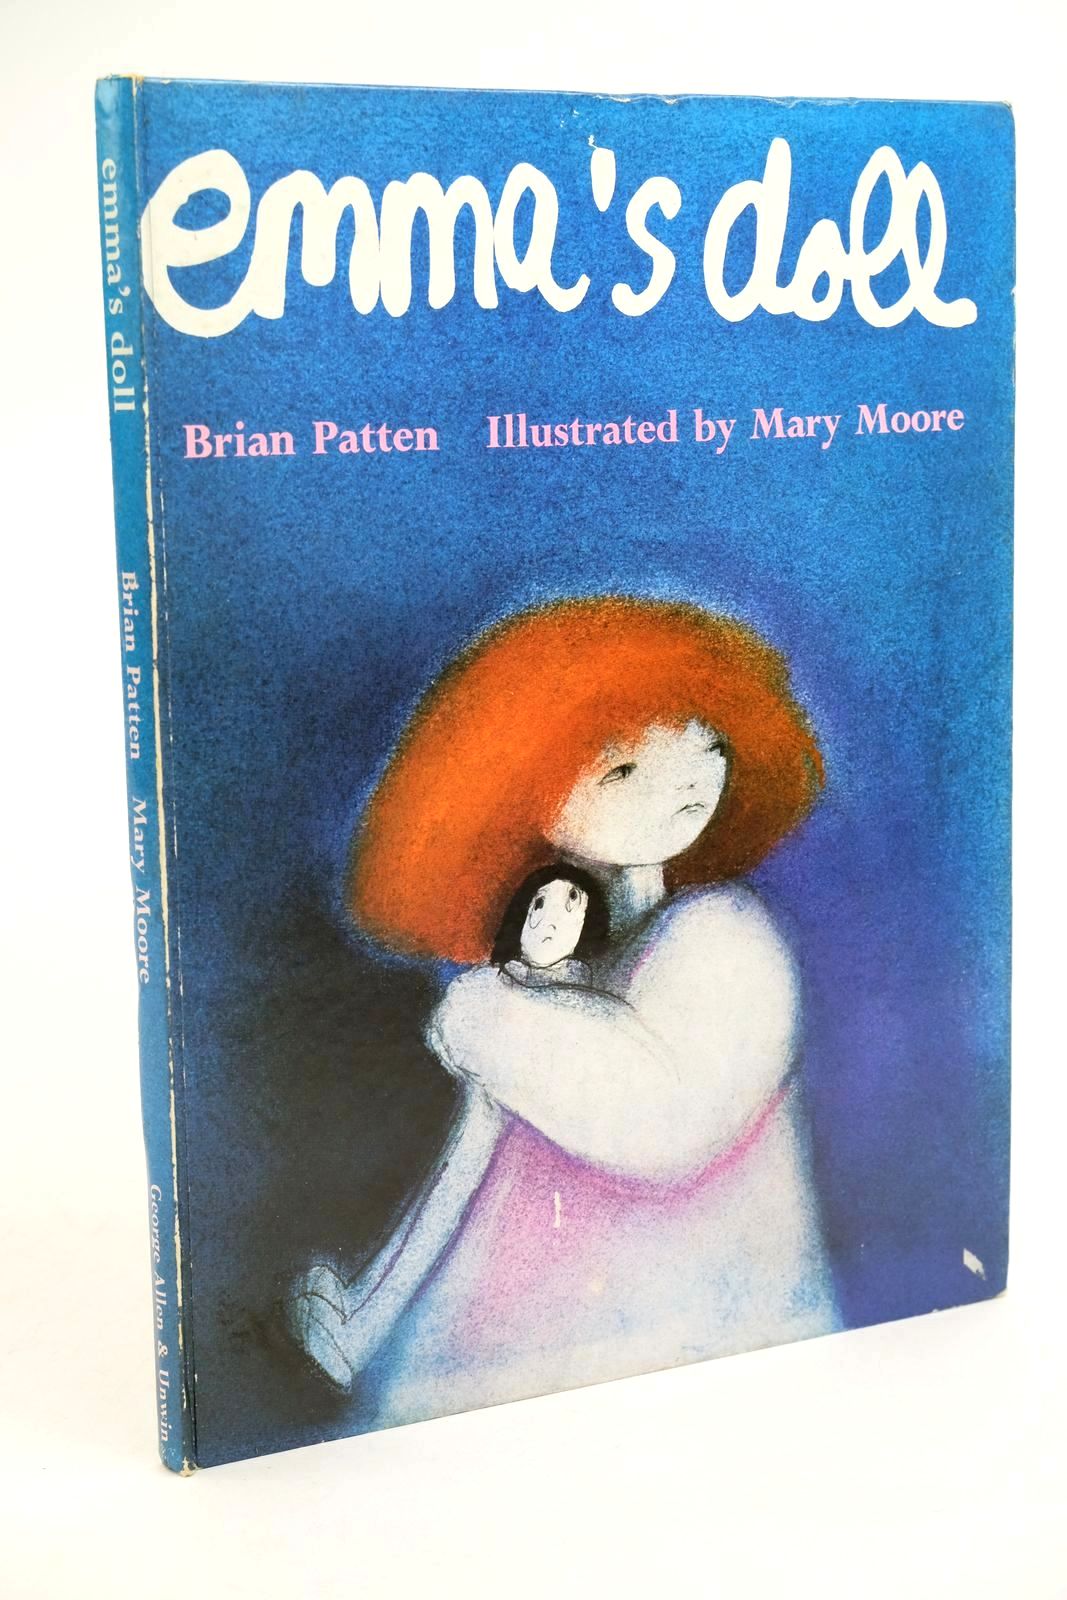 Photo of EMMA'S DOLL written by Patten, Brian illustrated by Moore, Mary published by George Allen & Unwin Ltd. (STOCK CODE: 1323078)  for sale by Stella & Rose's Books